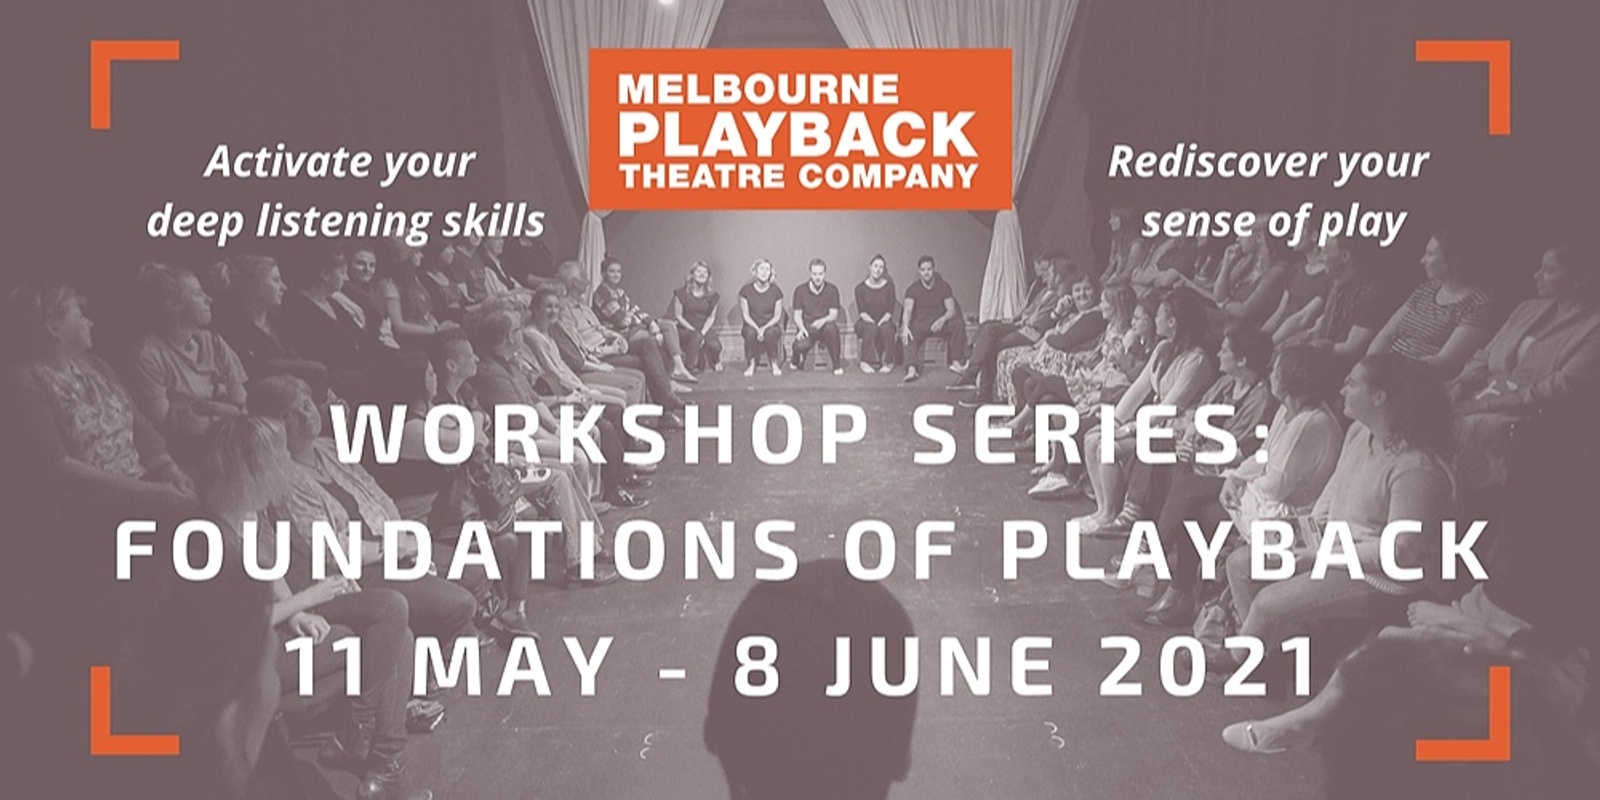 Banner image for Playback Workshop - Melbourne Playback Theatre Company